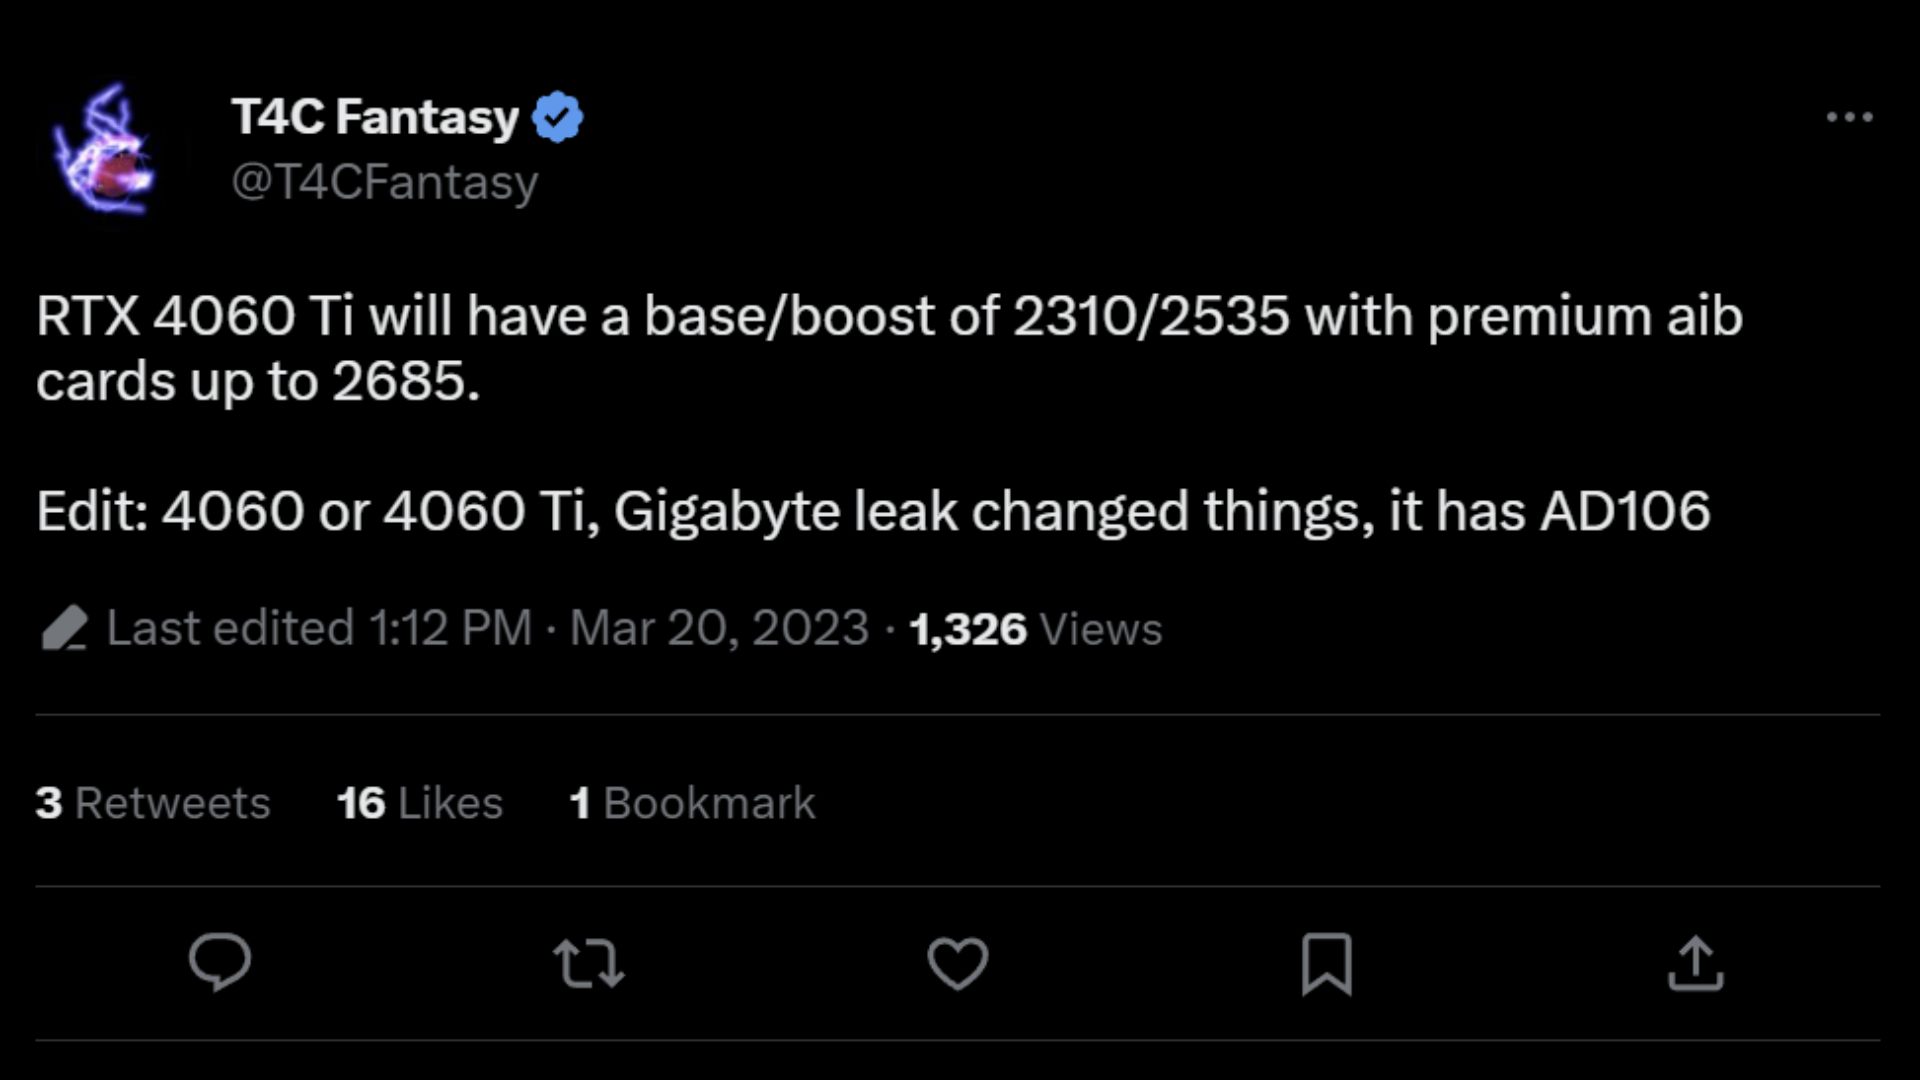 Nvidia RTX 4060 Ti clock speeds: Tweet by T4CFantasy with graphics card specs 